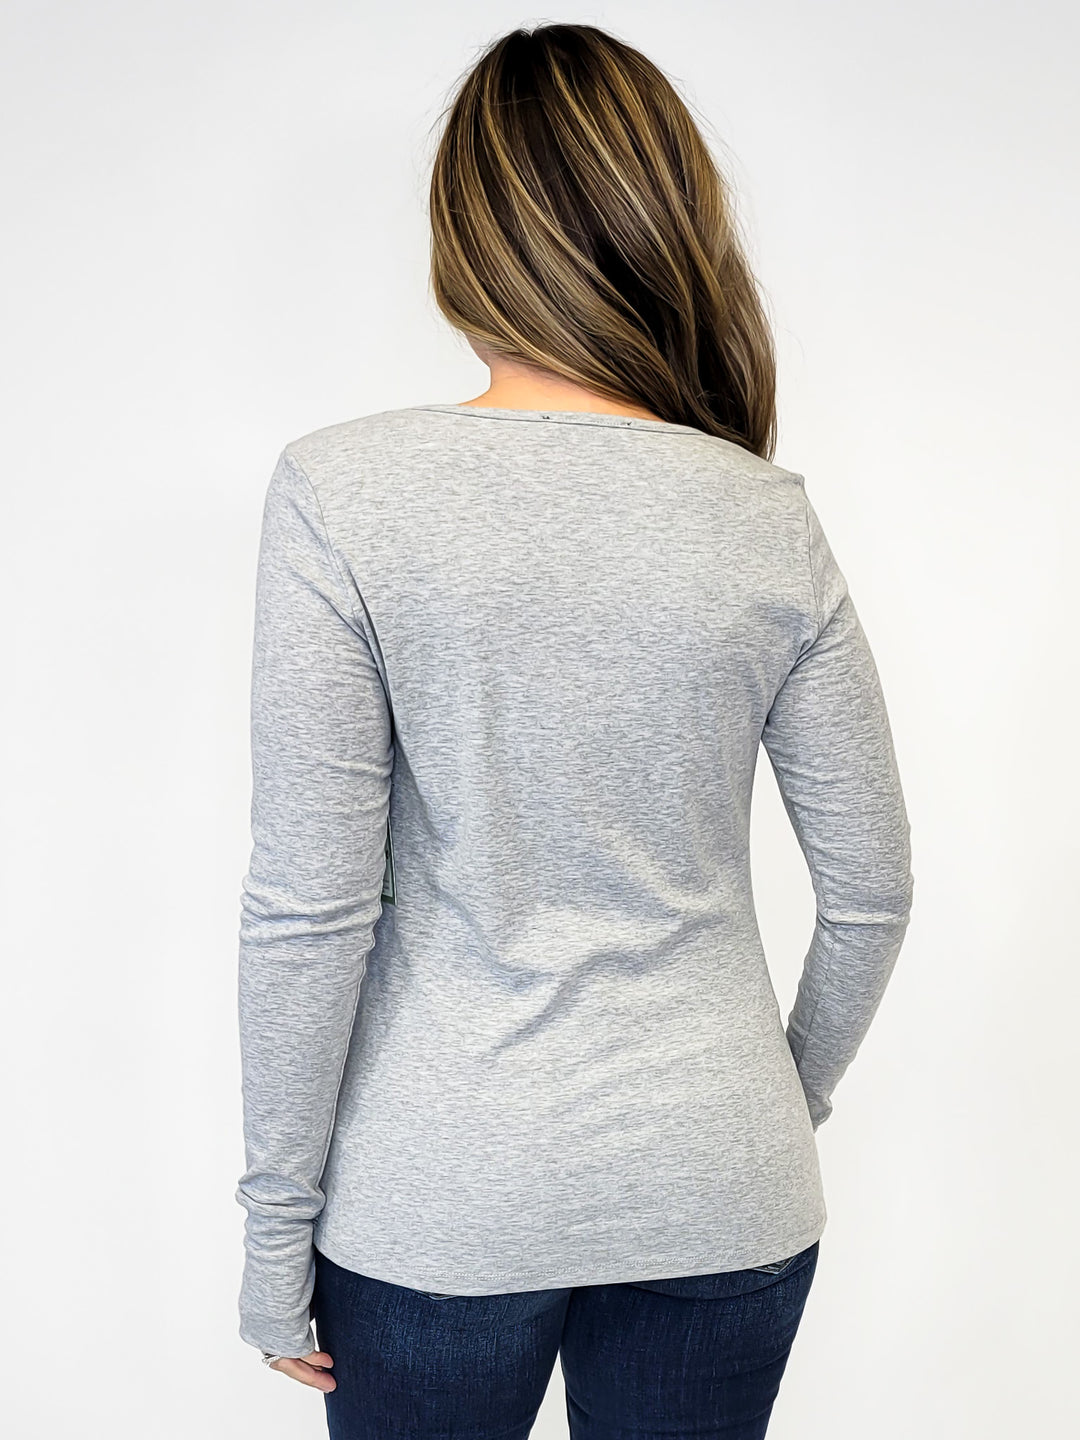 LONG SLEEVE HENLEY KNIT TOP W/ ANTIQUE GOLD BUTTONS - GREY